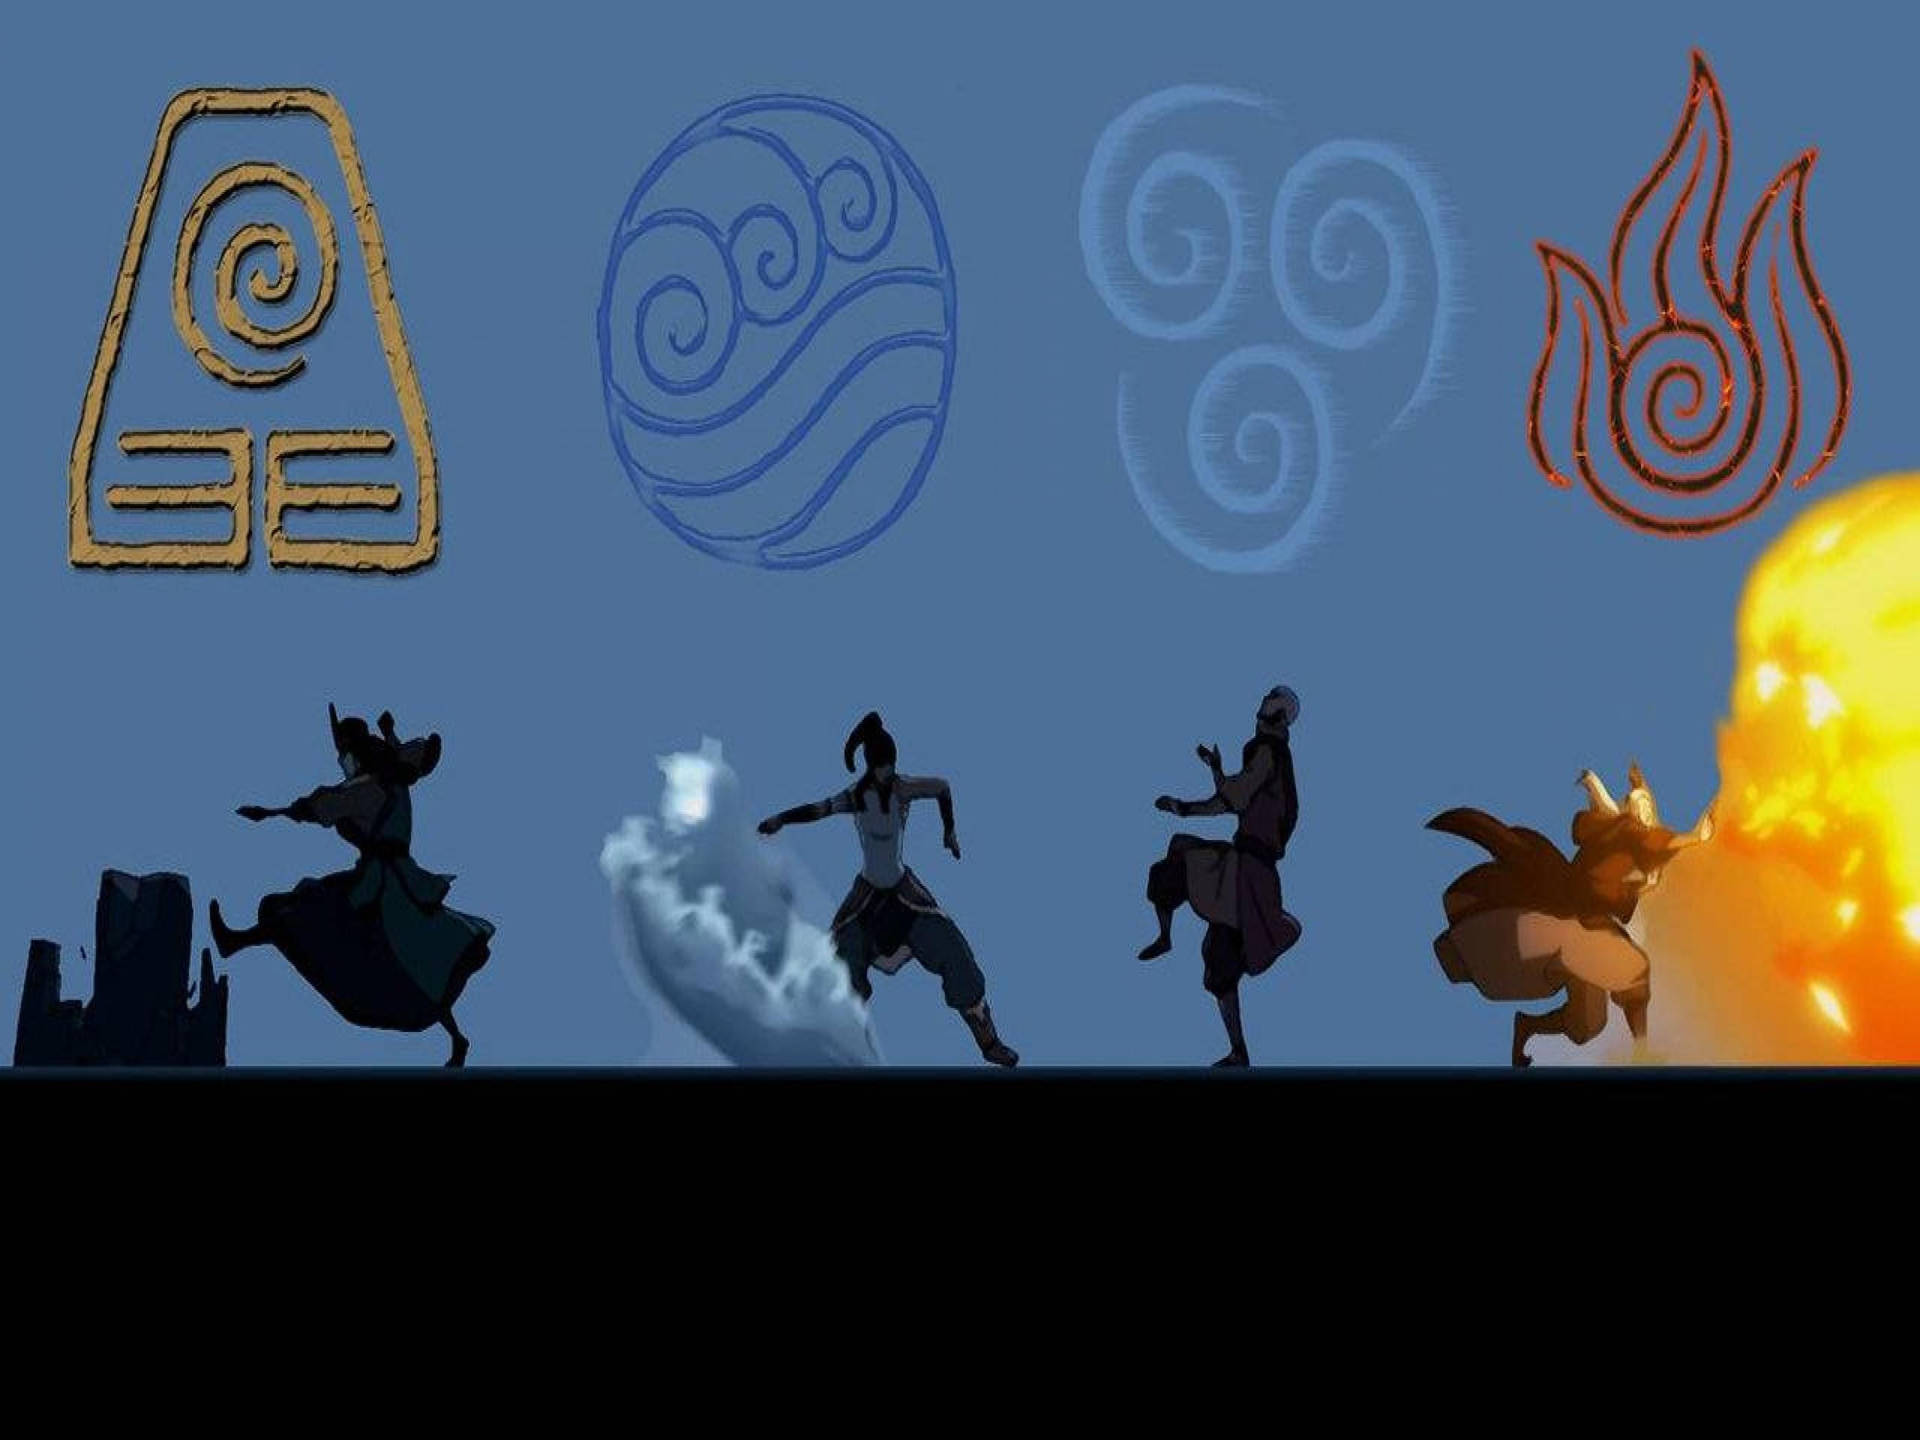 2800X2100 Avatar The Last Airbender Wallpaper and Background